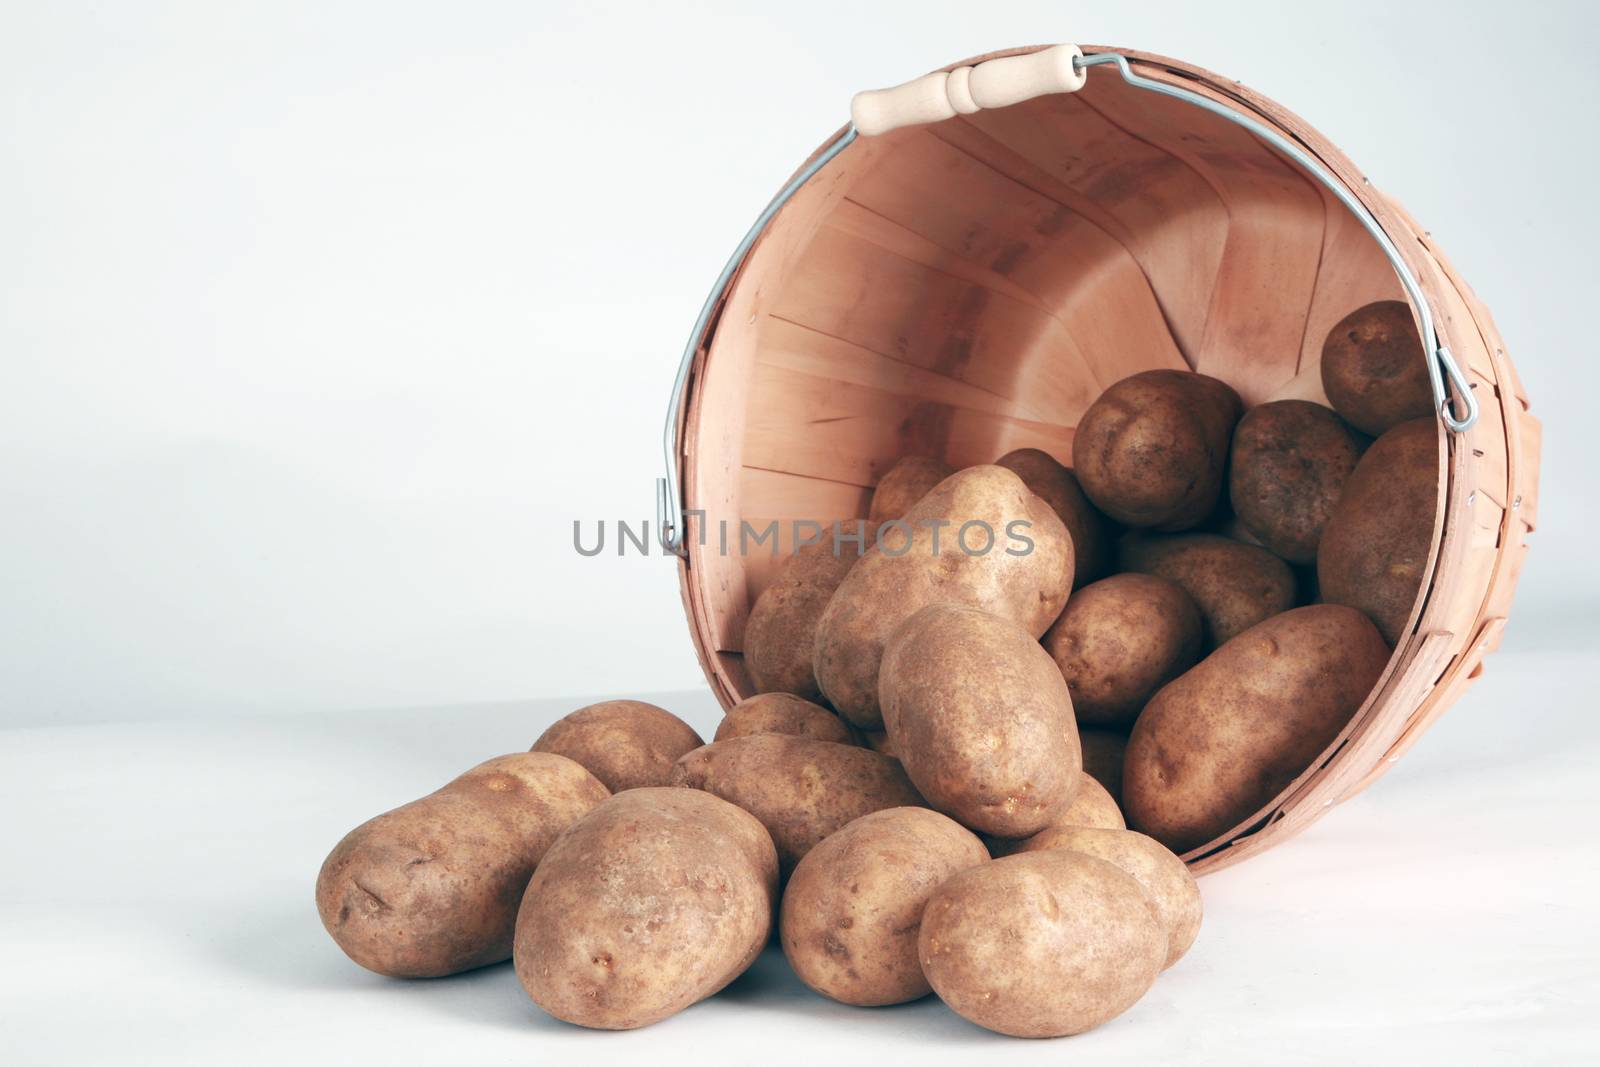 Bushel of potatoes is spilling out of the basket.  Whole potatoes are shown against a white background.